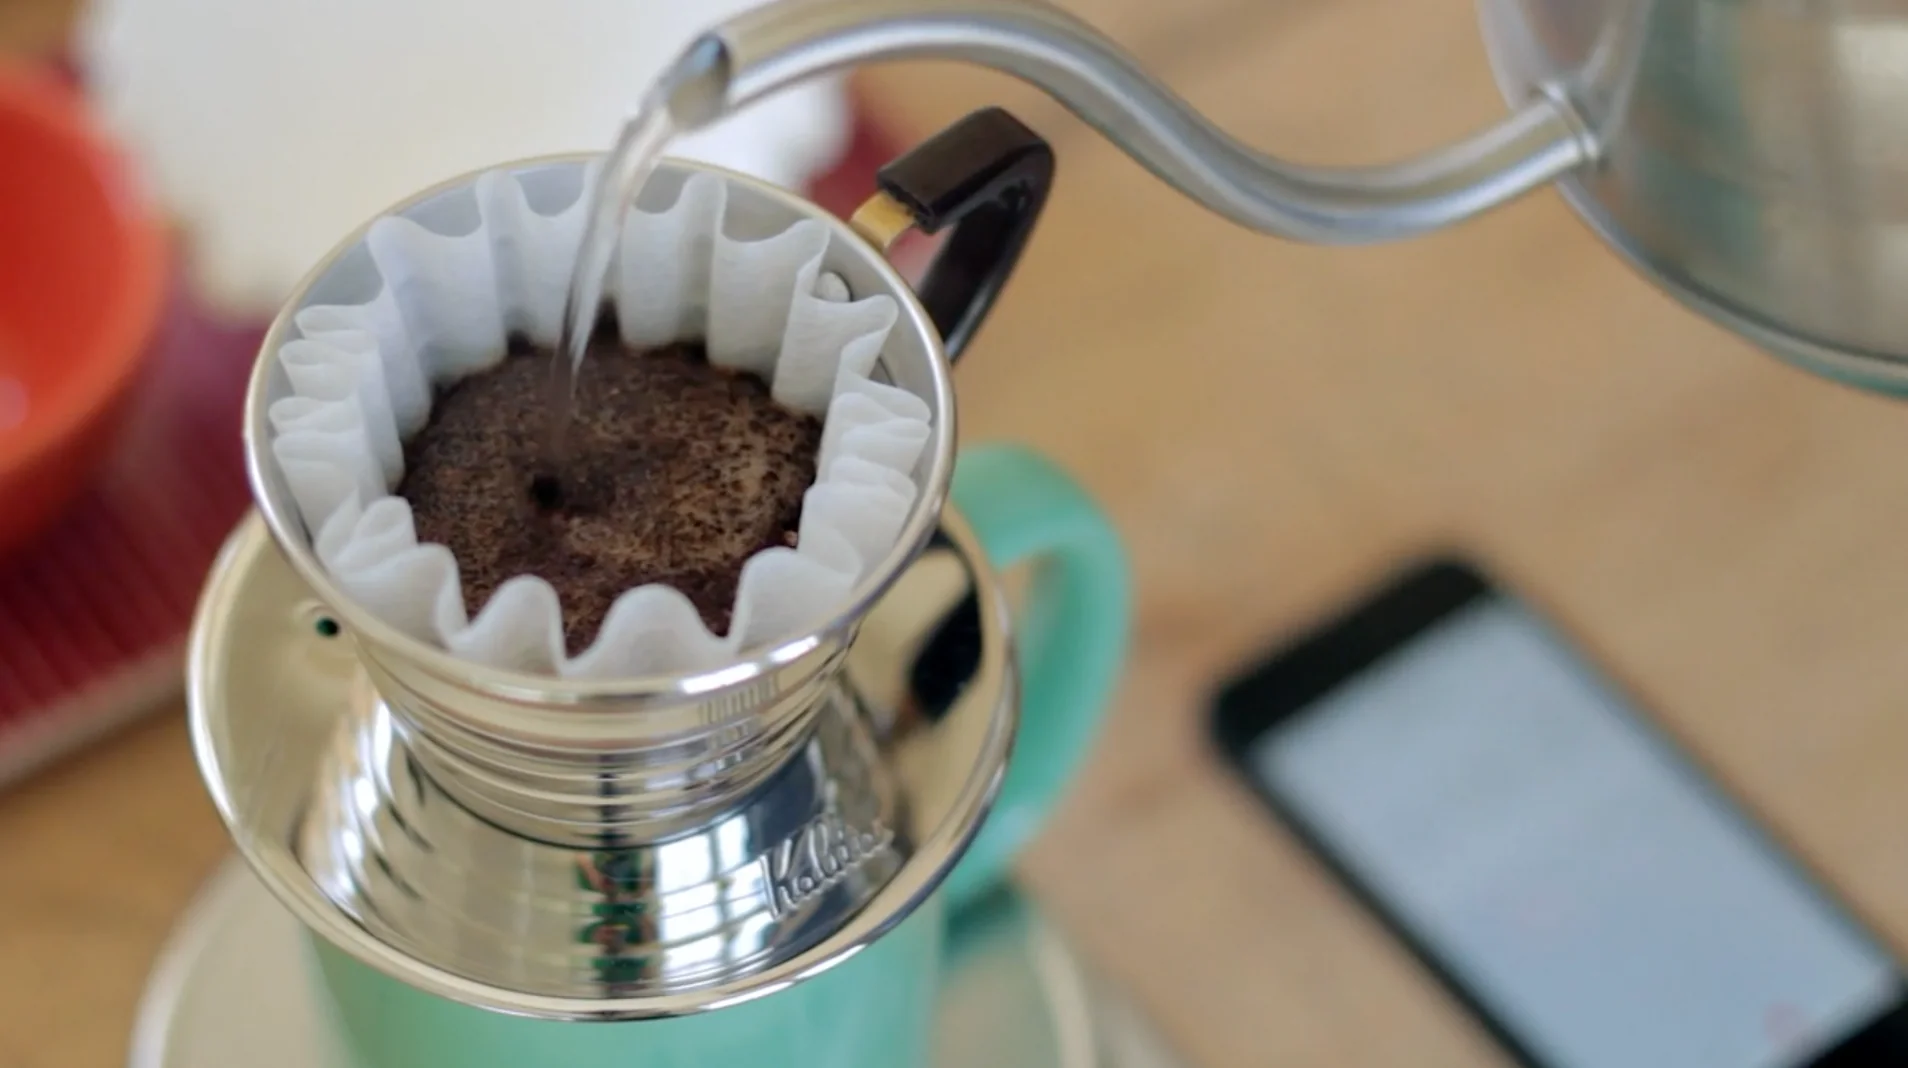 One-person pour-over